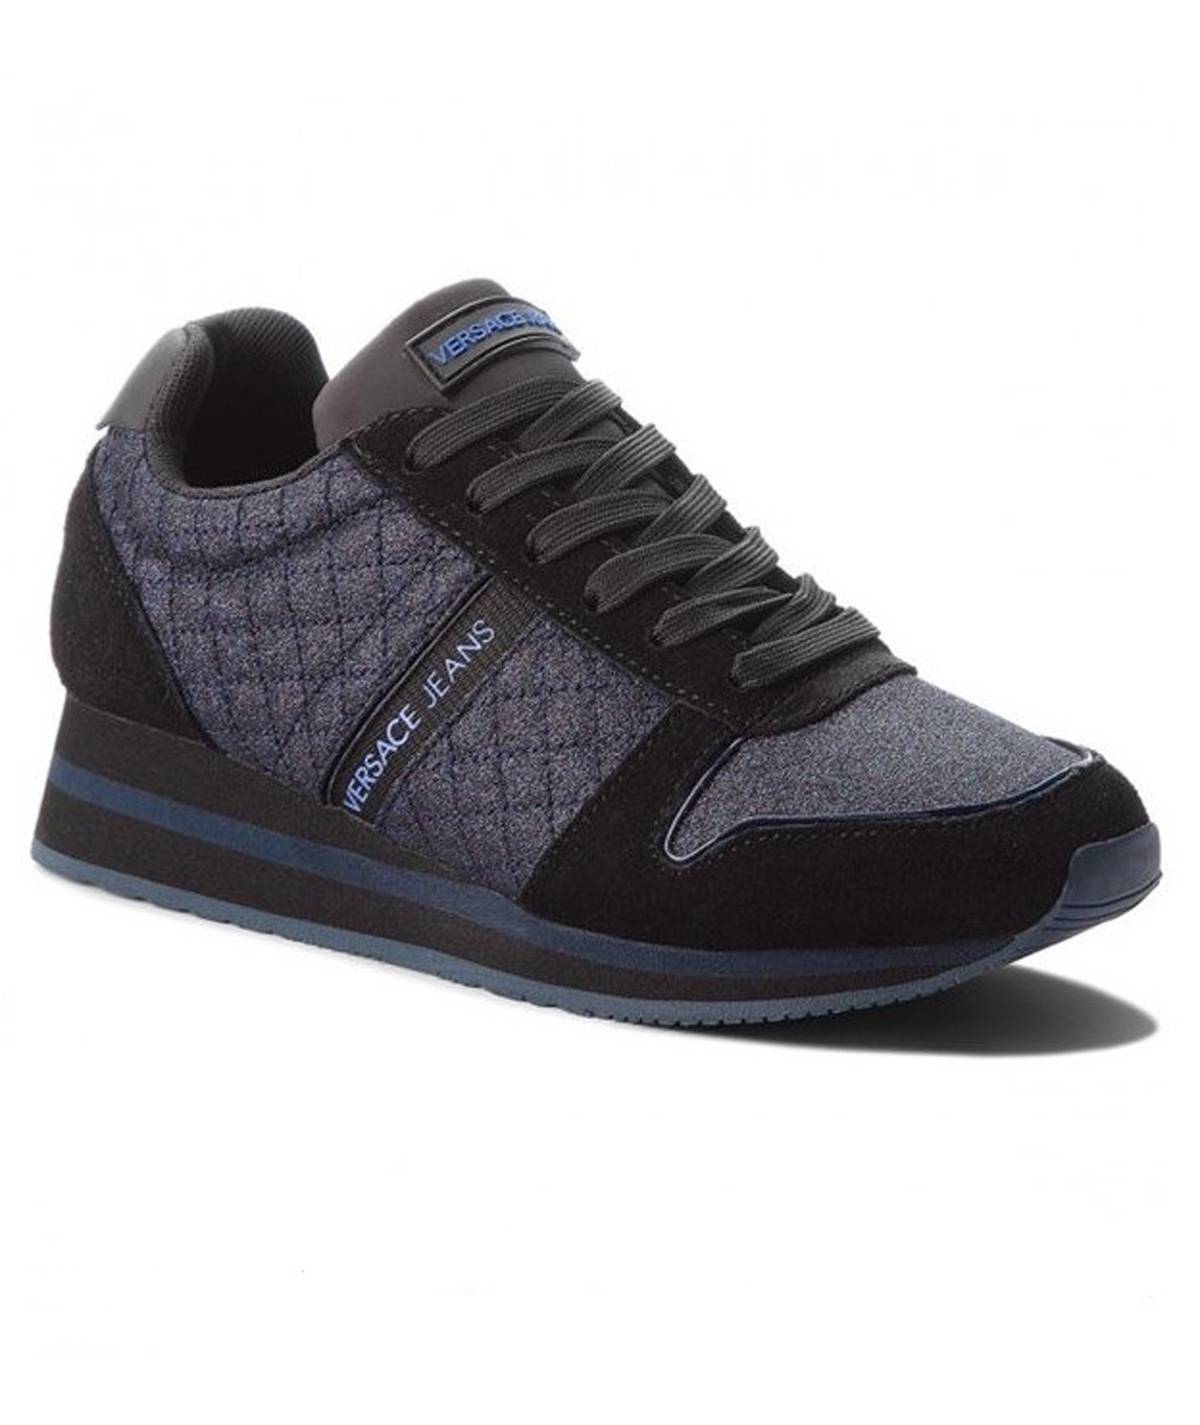 DEPORTIVA VERSACE GLITTER QUIL